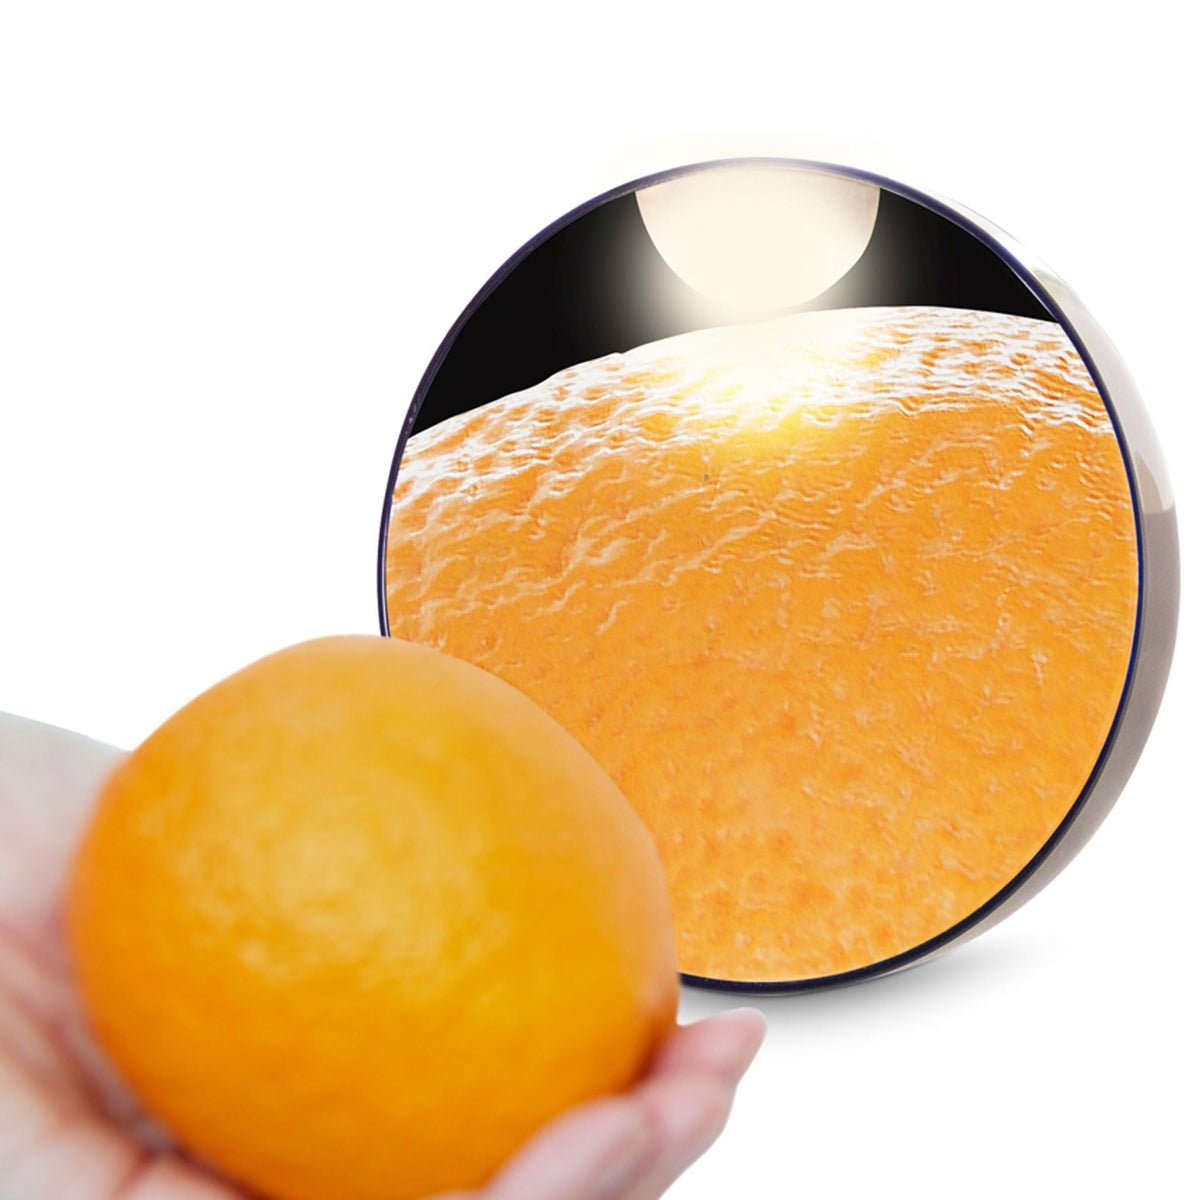 x10 magnification mirror with orange infront of it reflecting 10x magnification on texture of the orange peel